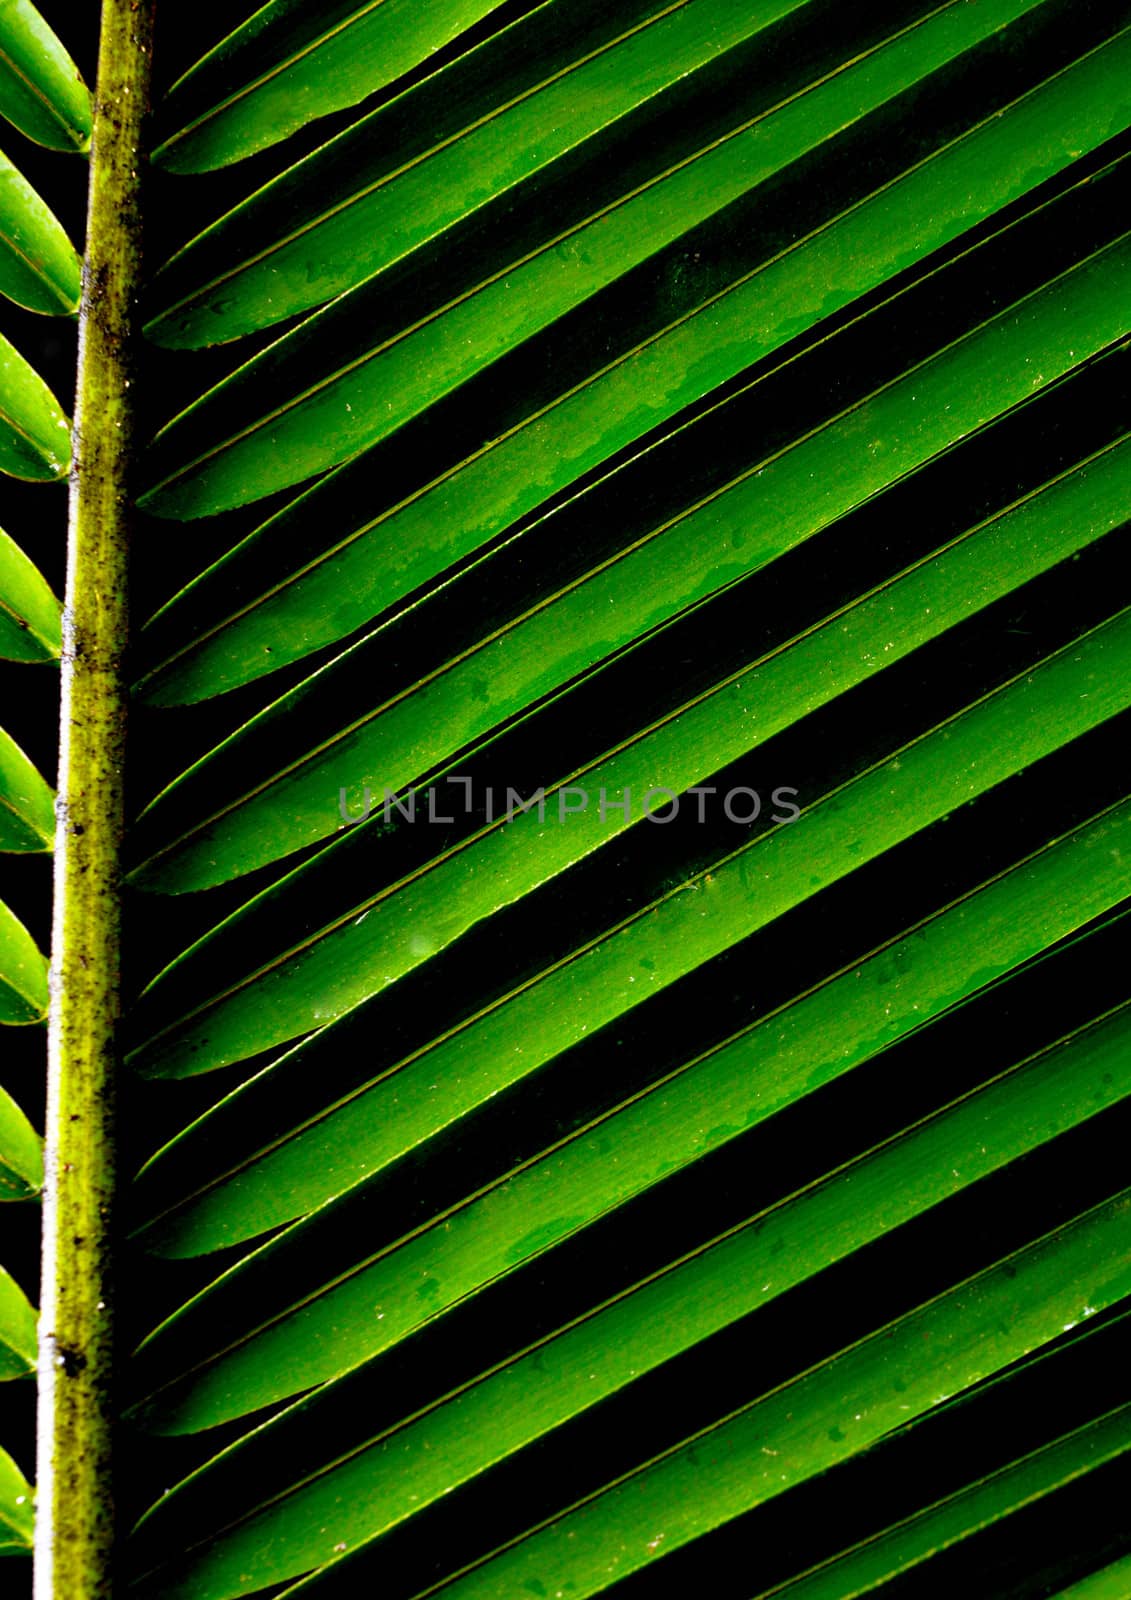 green background with a lush tropical palm frond